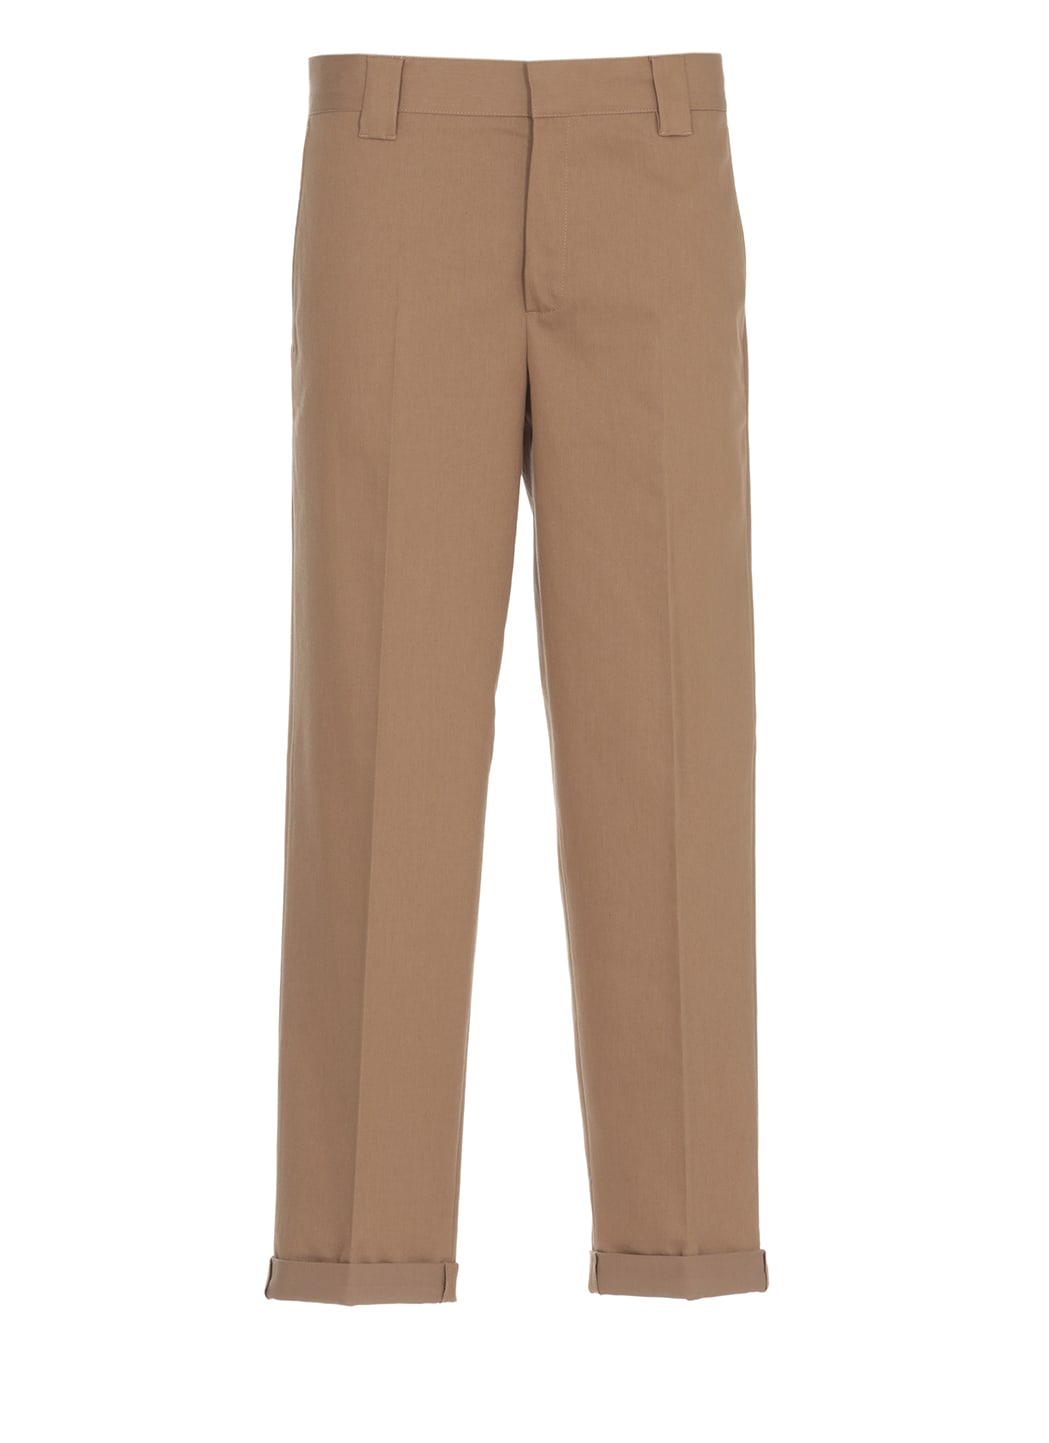 GOLDEN GOOSE CHINO SKATE trousers